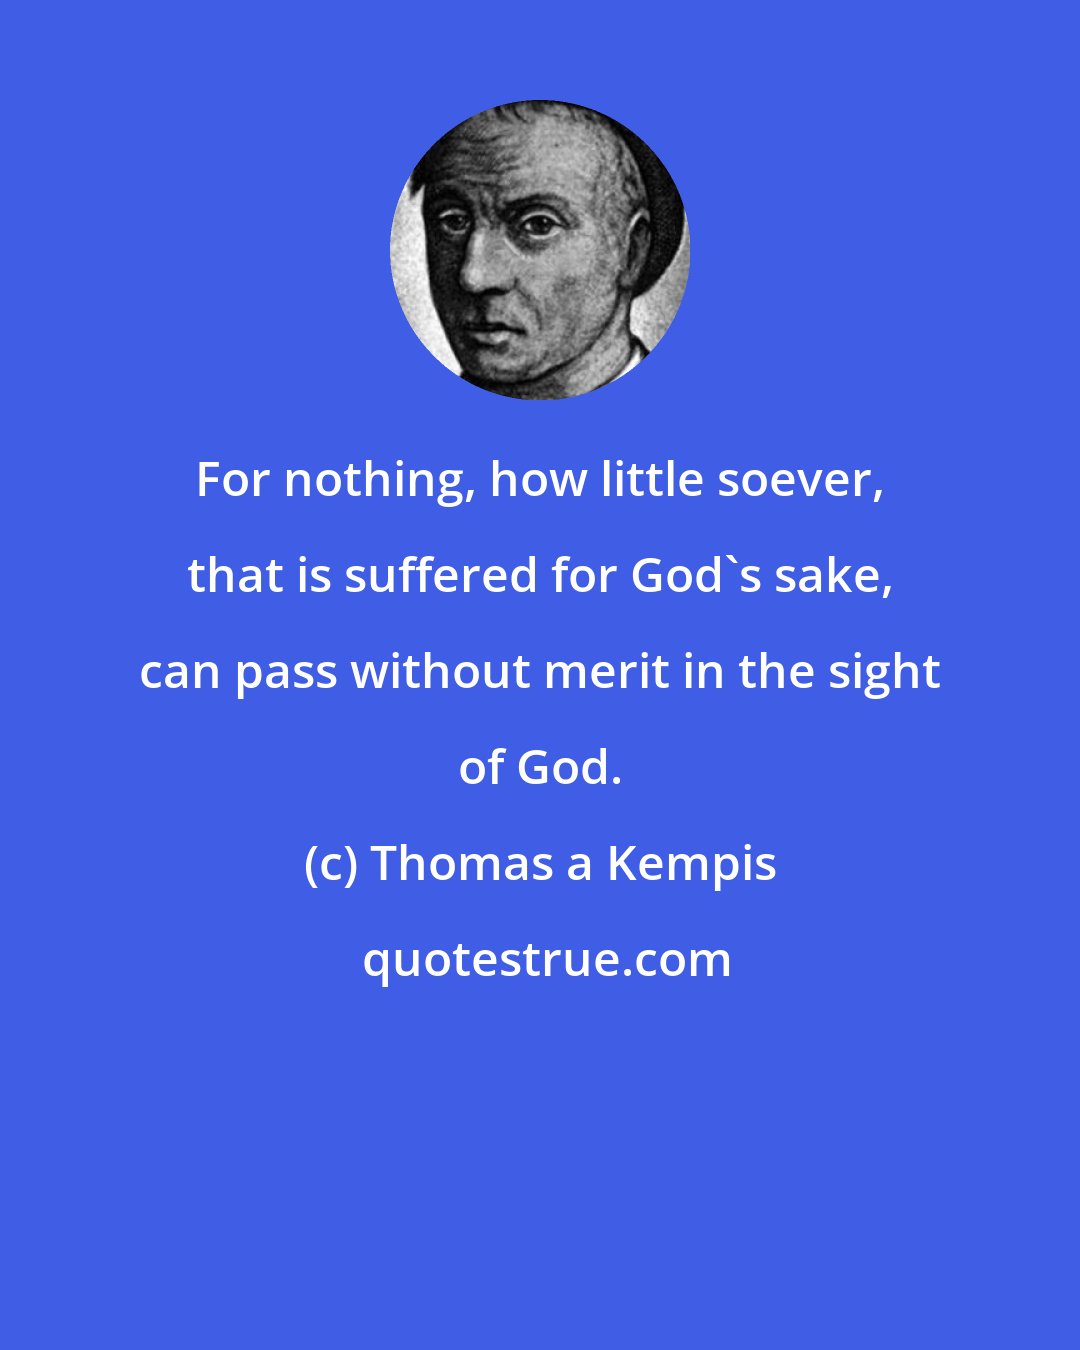 Thomas a Kempis: For nothing, how little soever, that is suffered for God's sake, can pass without merit in the sight of God.